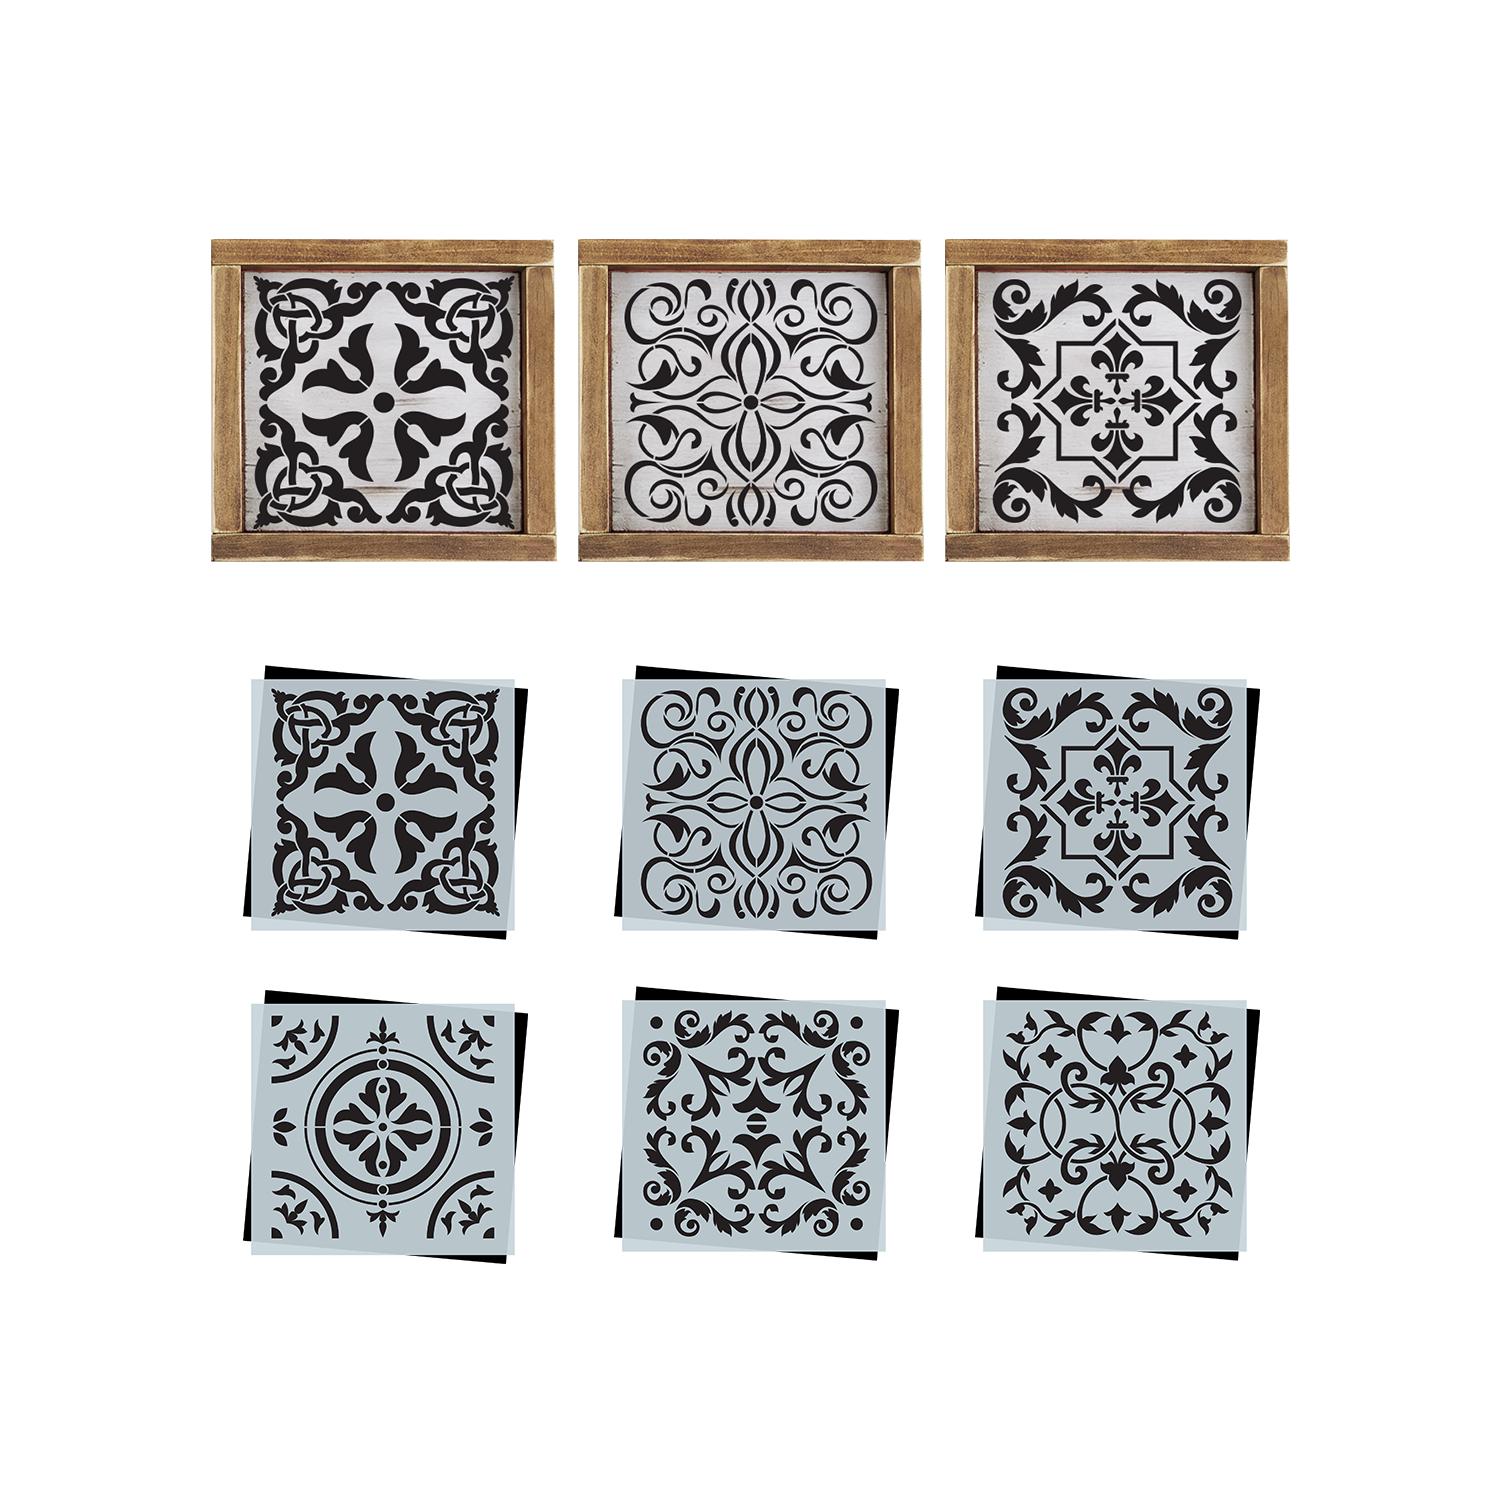 diy resuable mylar mexican tiles stencils, Mexican farmhouse wood signs,  spanish inspired diy home decor, spanish tiles signs, stencils, spanish pattern wood sign stencil, tiered tray tile pattern